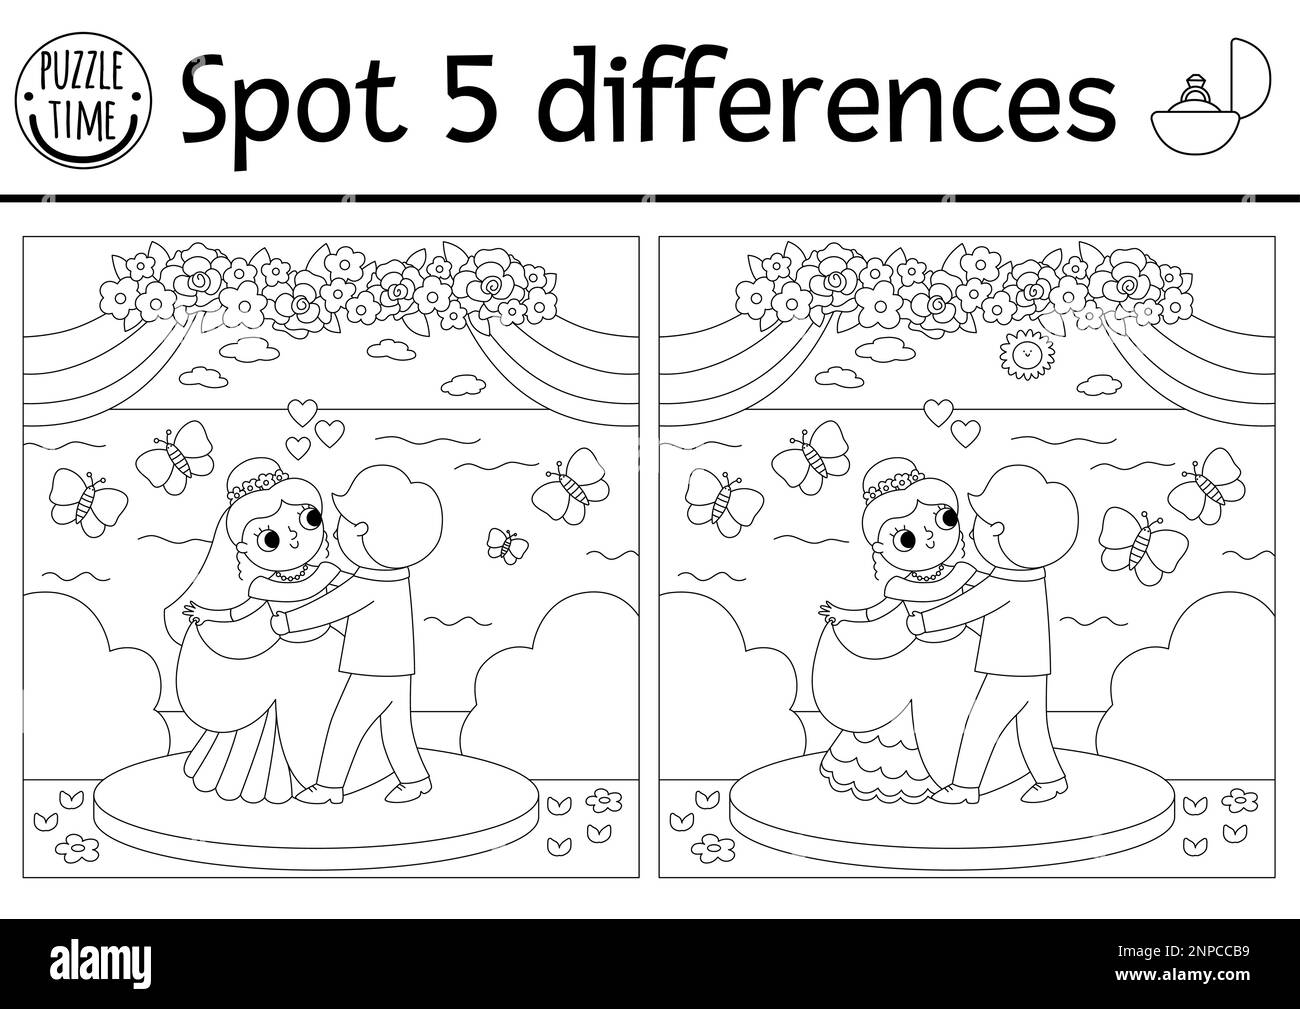 Find differences game for children wedding black and white educational activity with cute married couple marriage printable coloring page for kids w stock vector image art